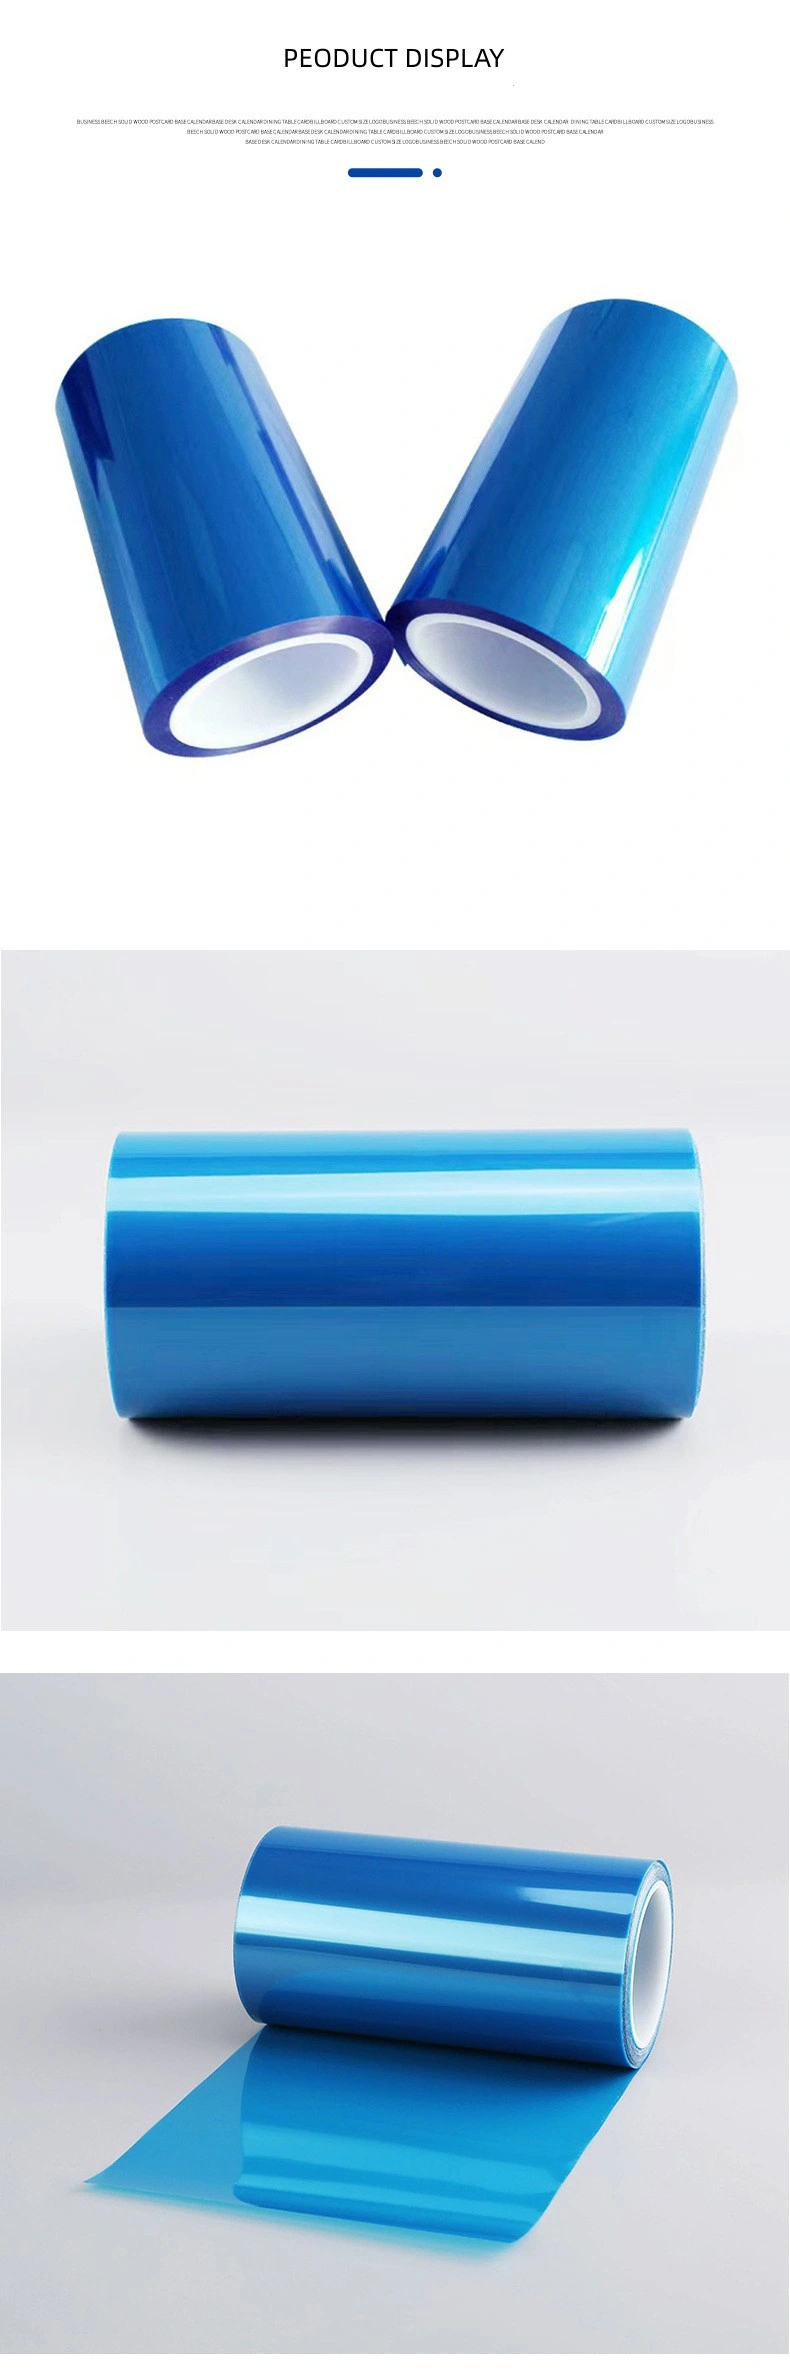 Double-Sided Release Film 0.075mm Dual-Silicon Dual-Blue Pet Release Film 3-6g